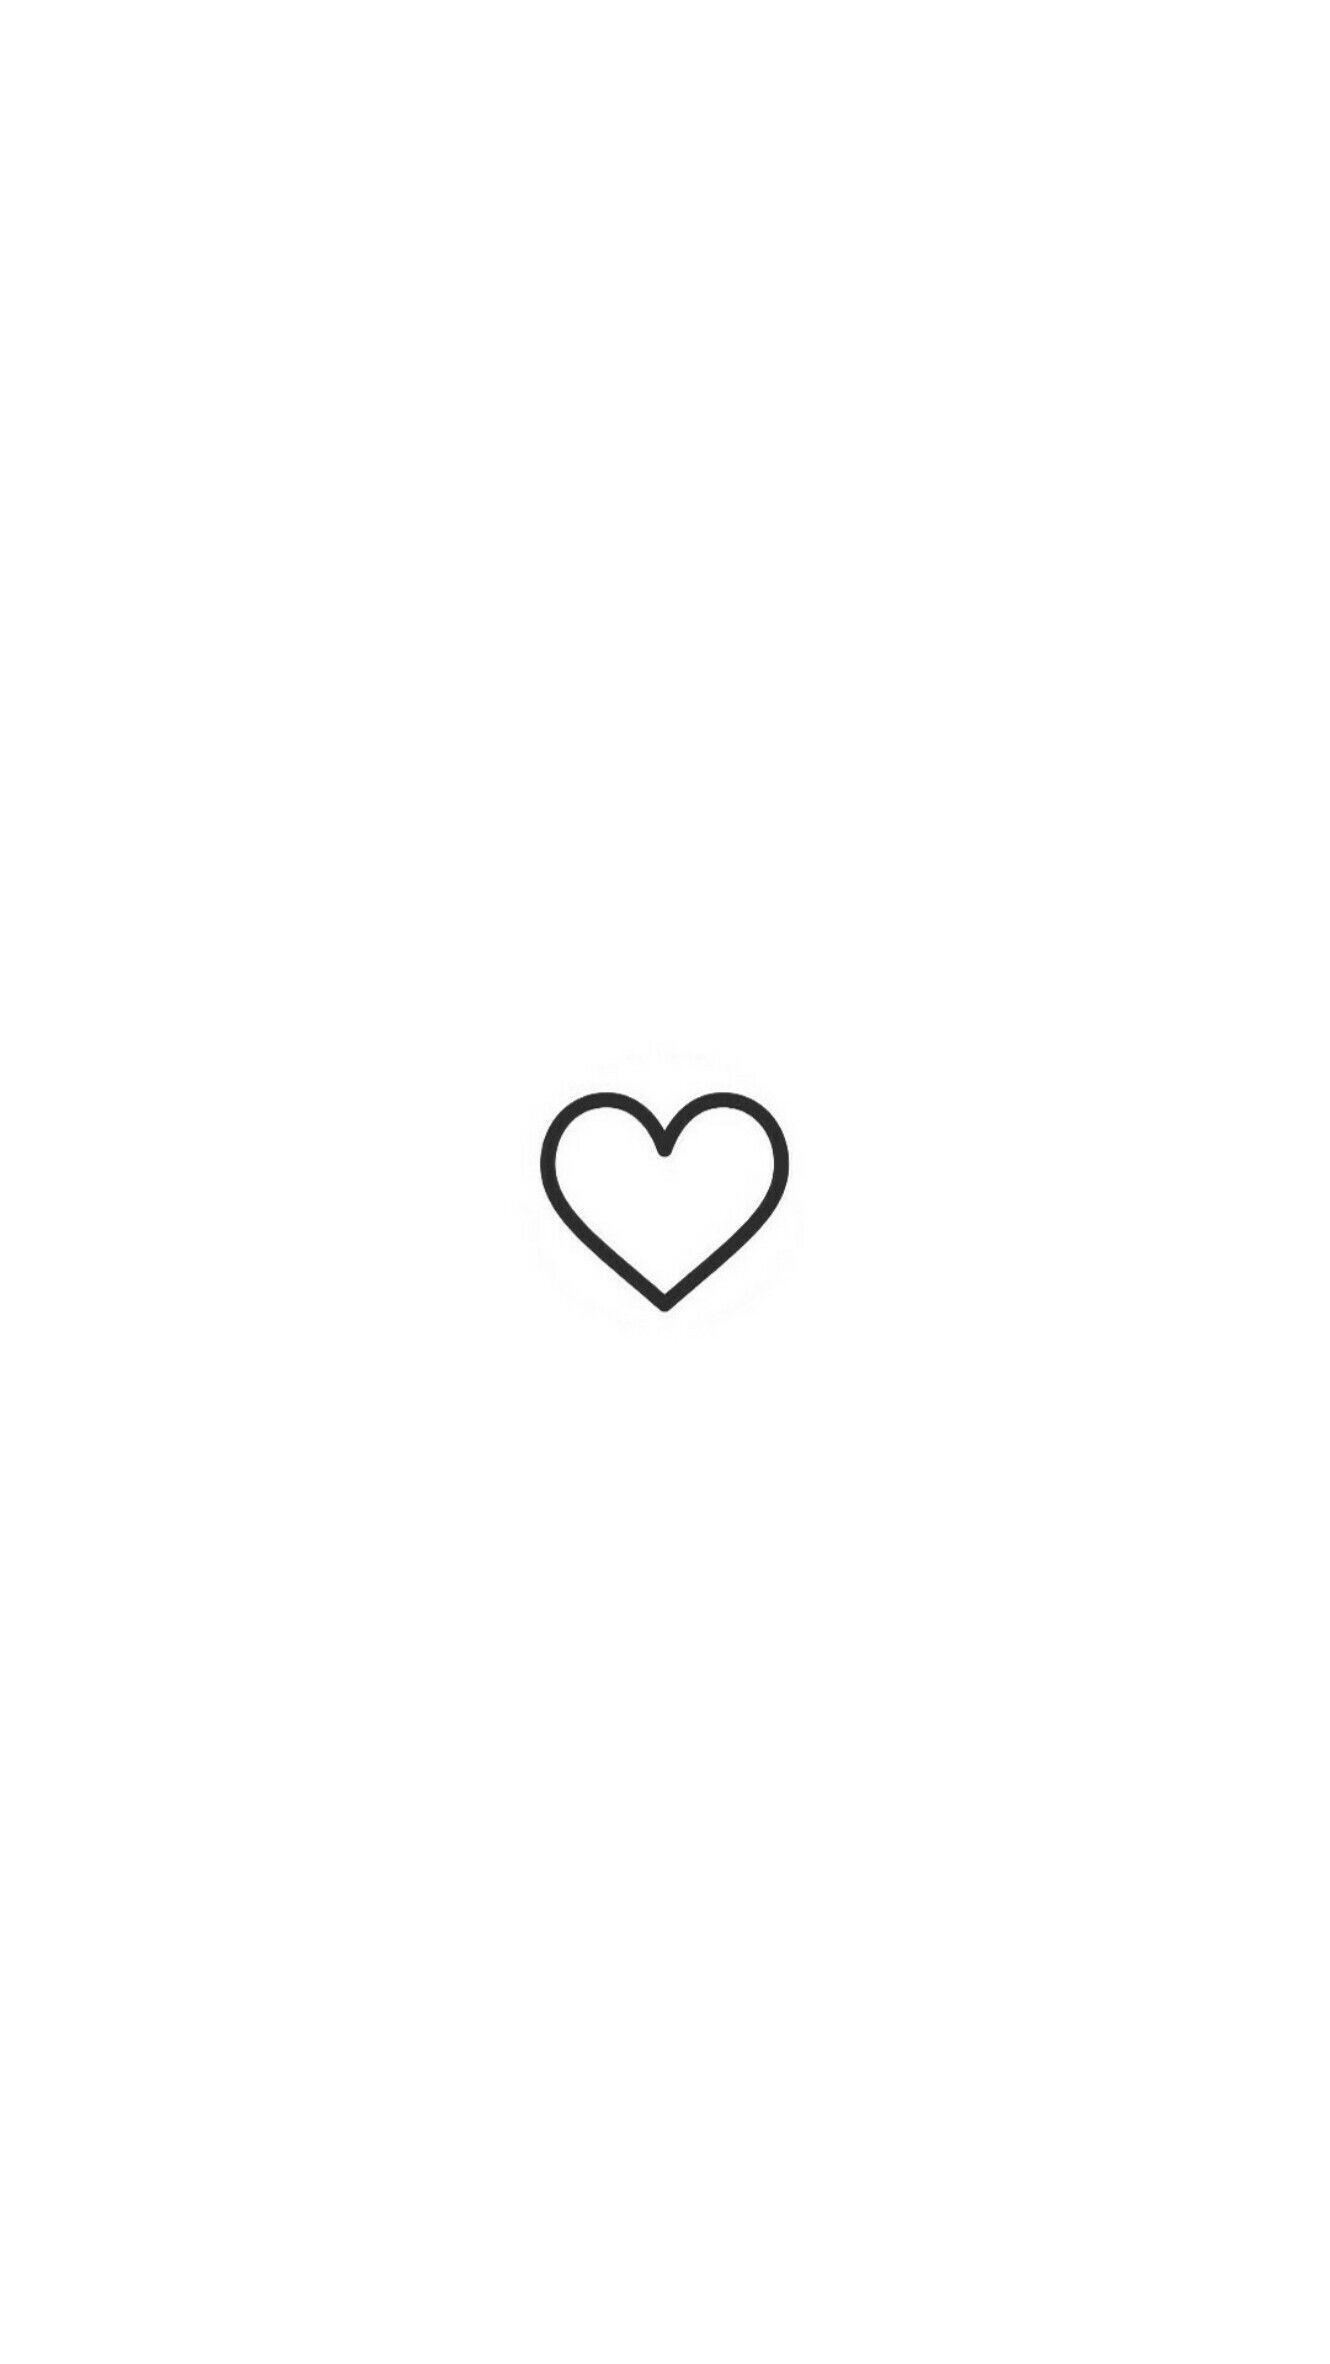 Cute Black and White Instagram Logo - highlights #highlight #instagram #insta #feed #feedinsta ...